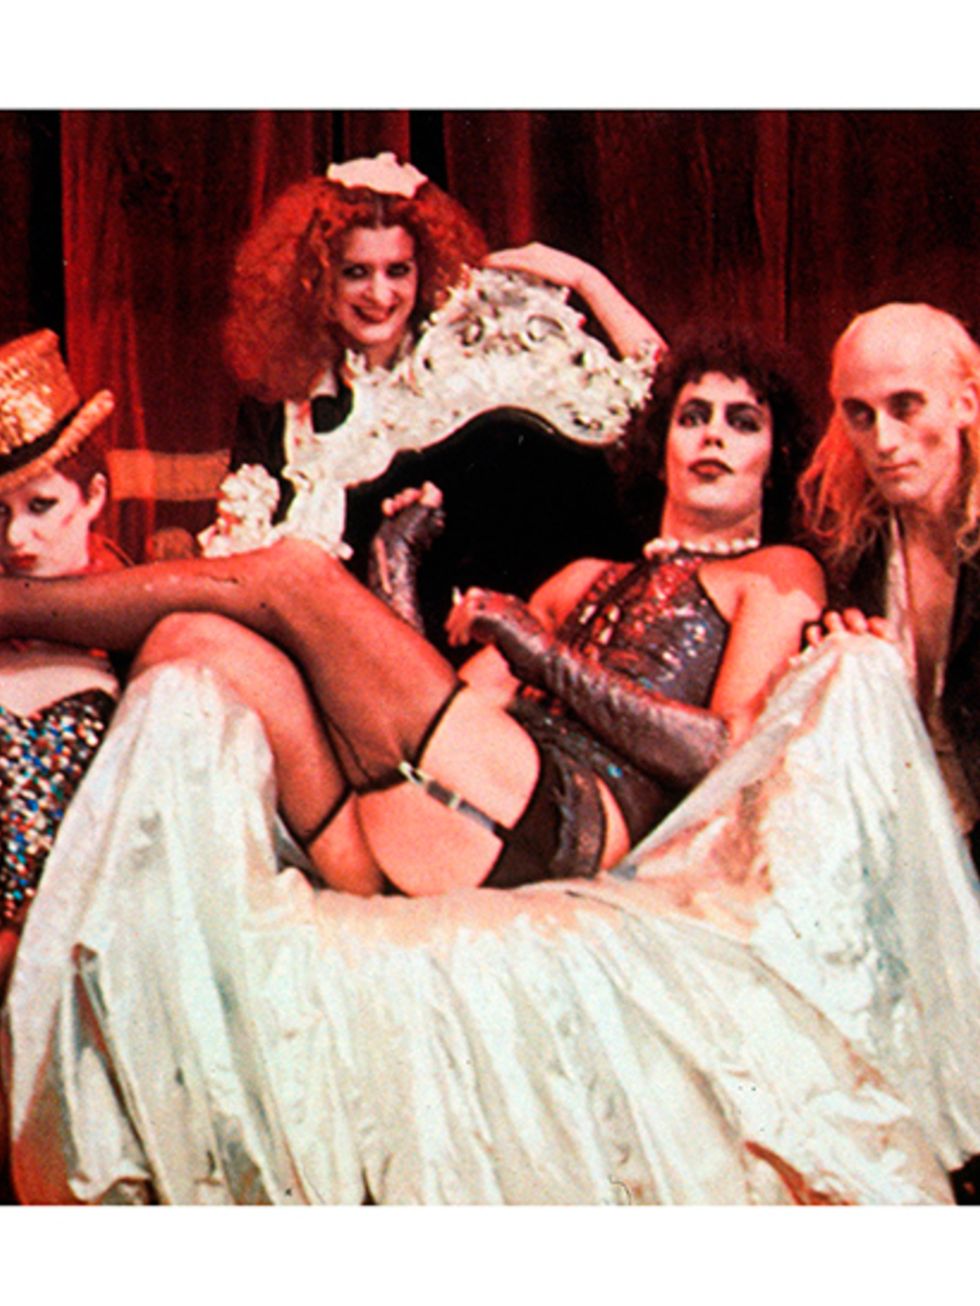 Jean Paul Gaultier: The Rocky Horror Picture Show (1975) by Jim Sharman